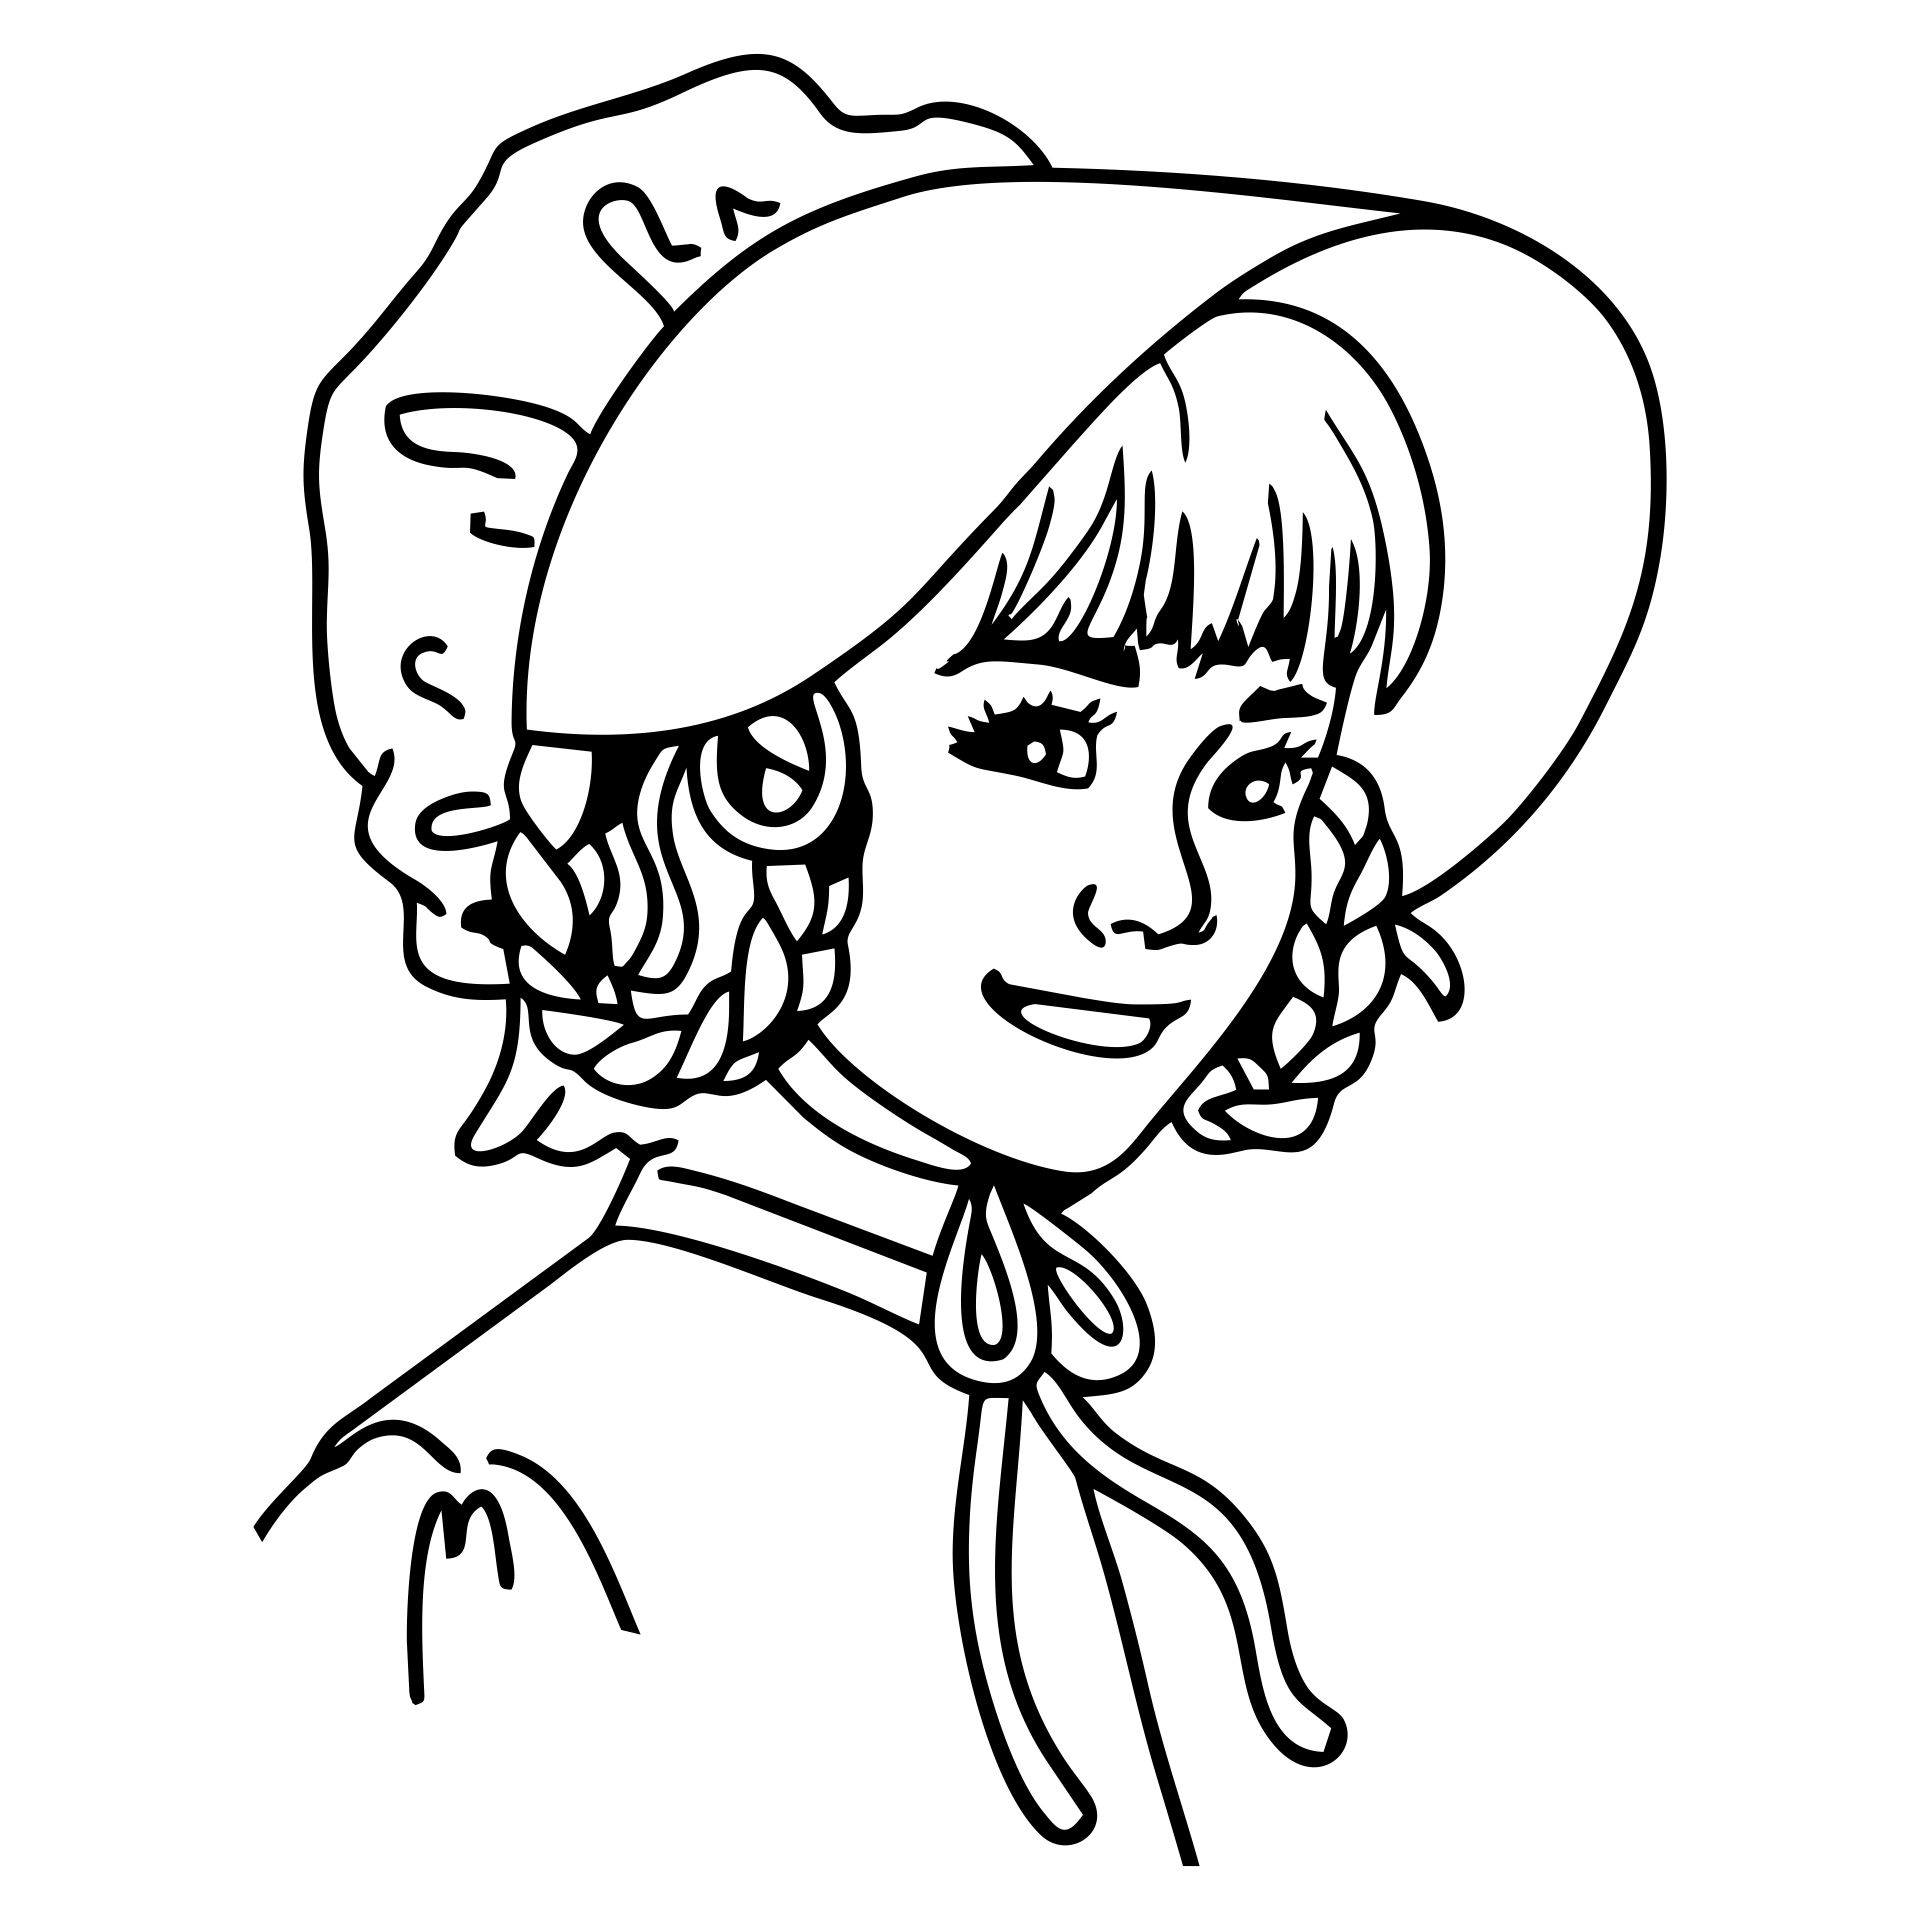 Printable Bonnet Girls Coloring Pages